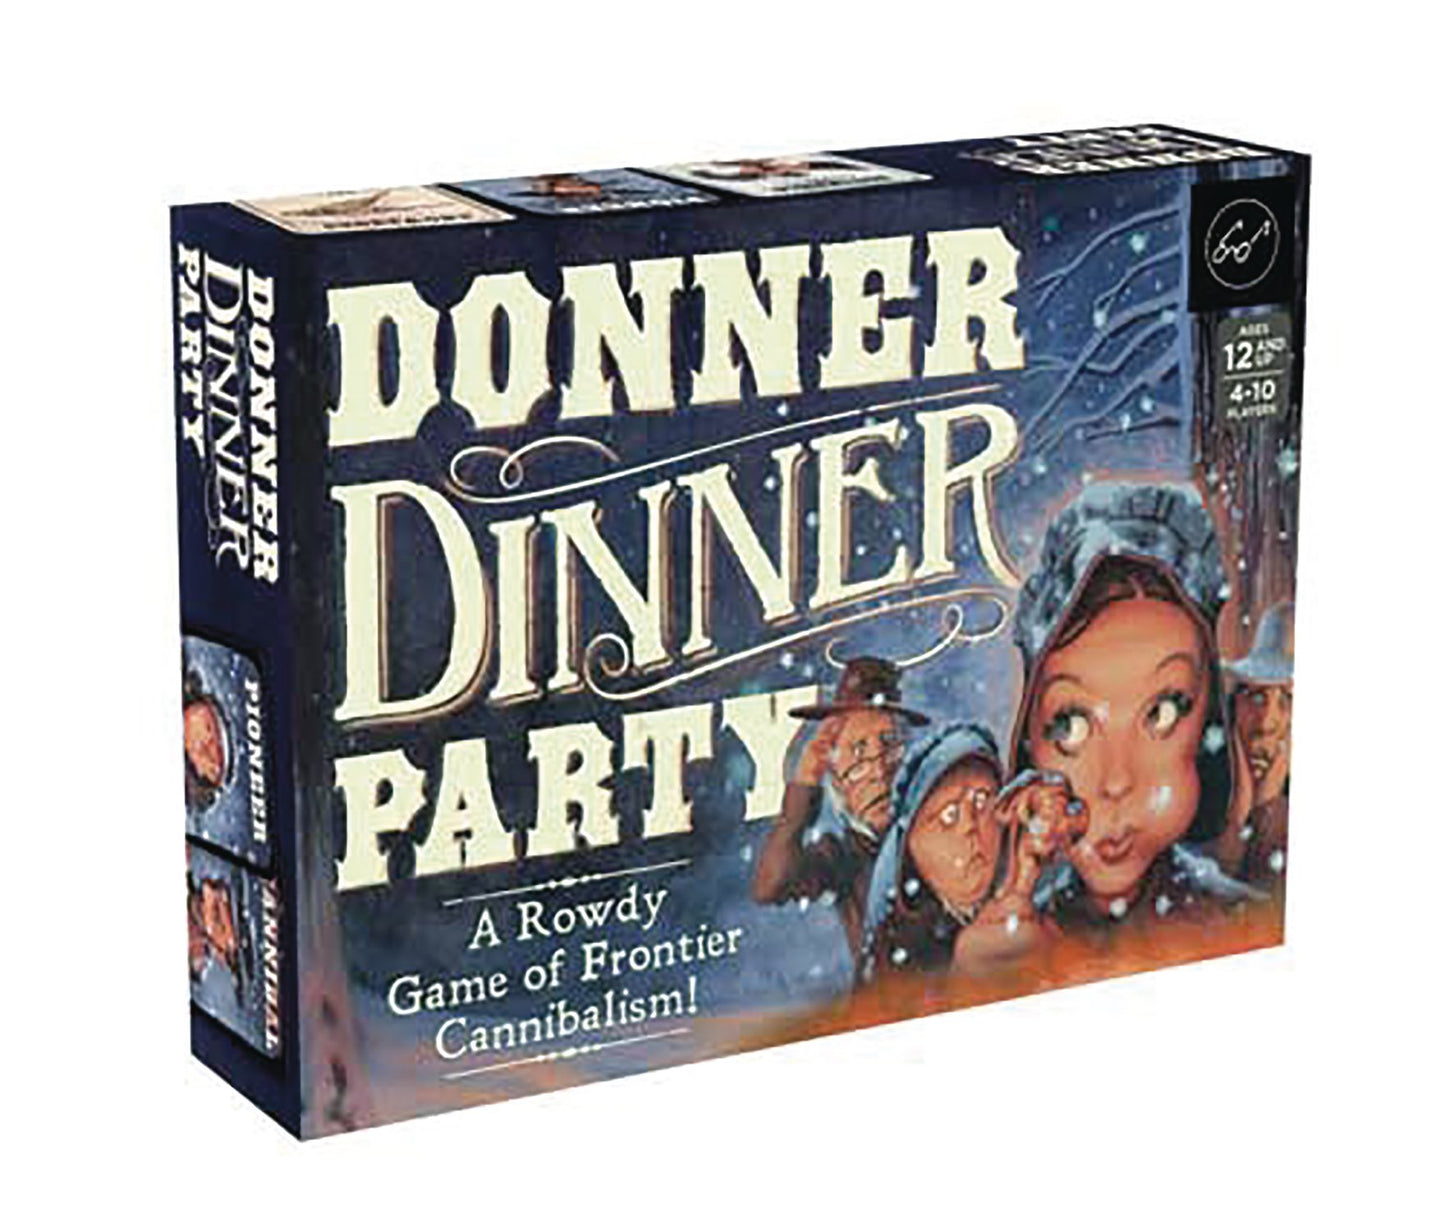 DONNER DINNER PARTY CARD GAME